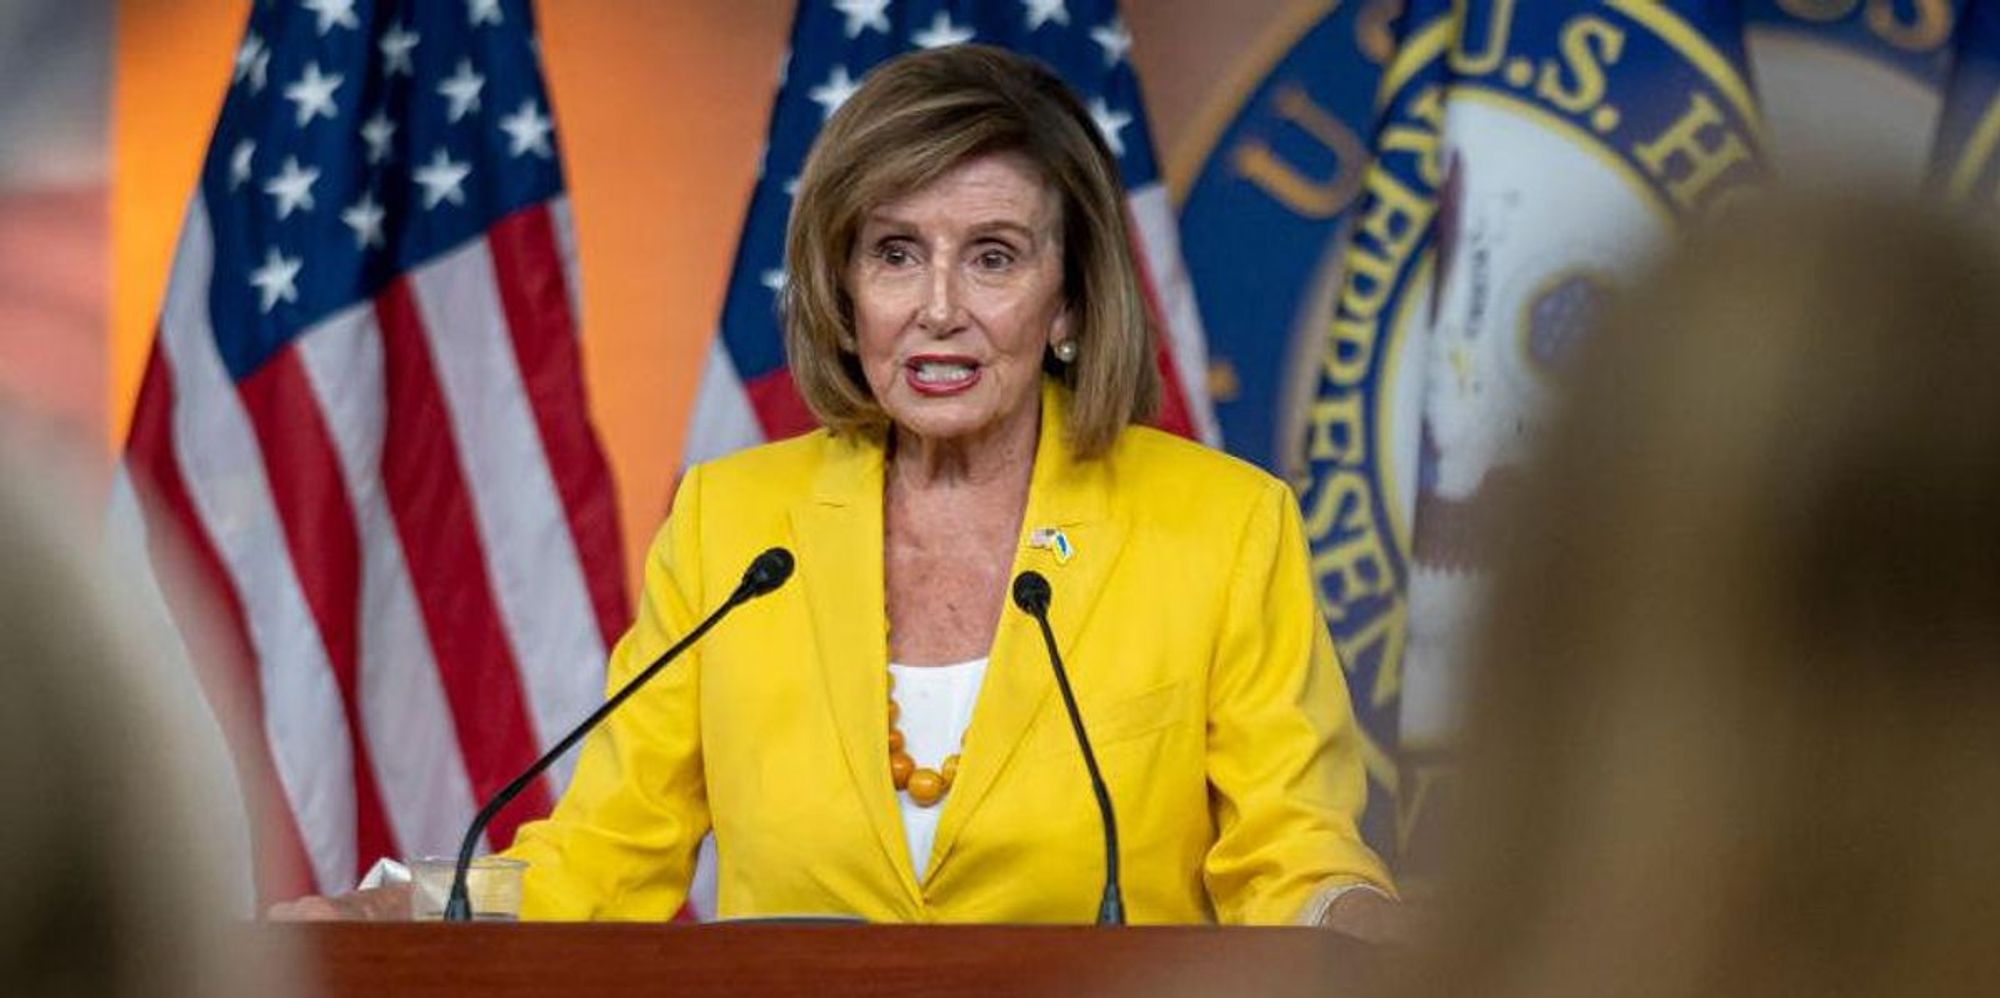 Reporter confronts Nancy Pelosi about husband's controversial stock purchases. Her reaction says it all.